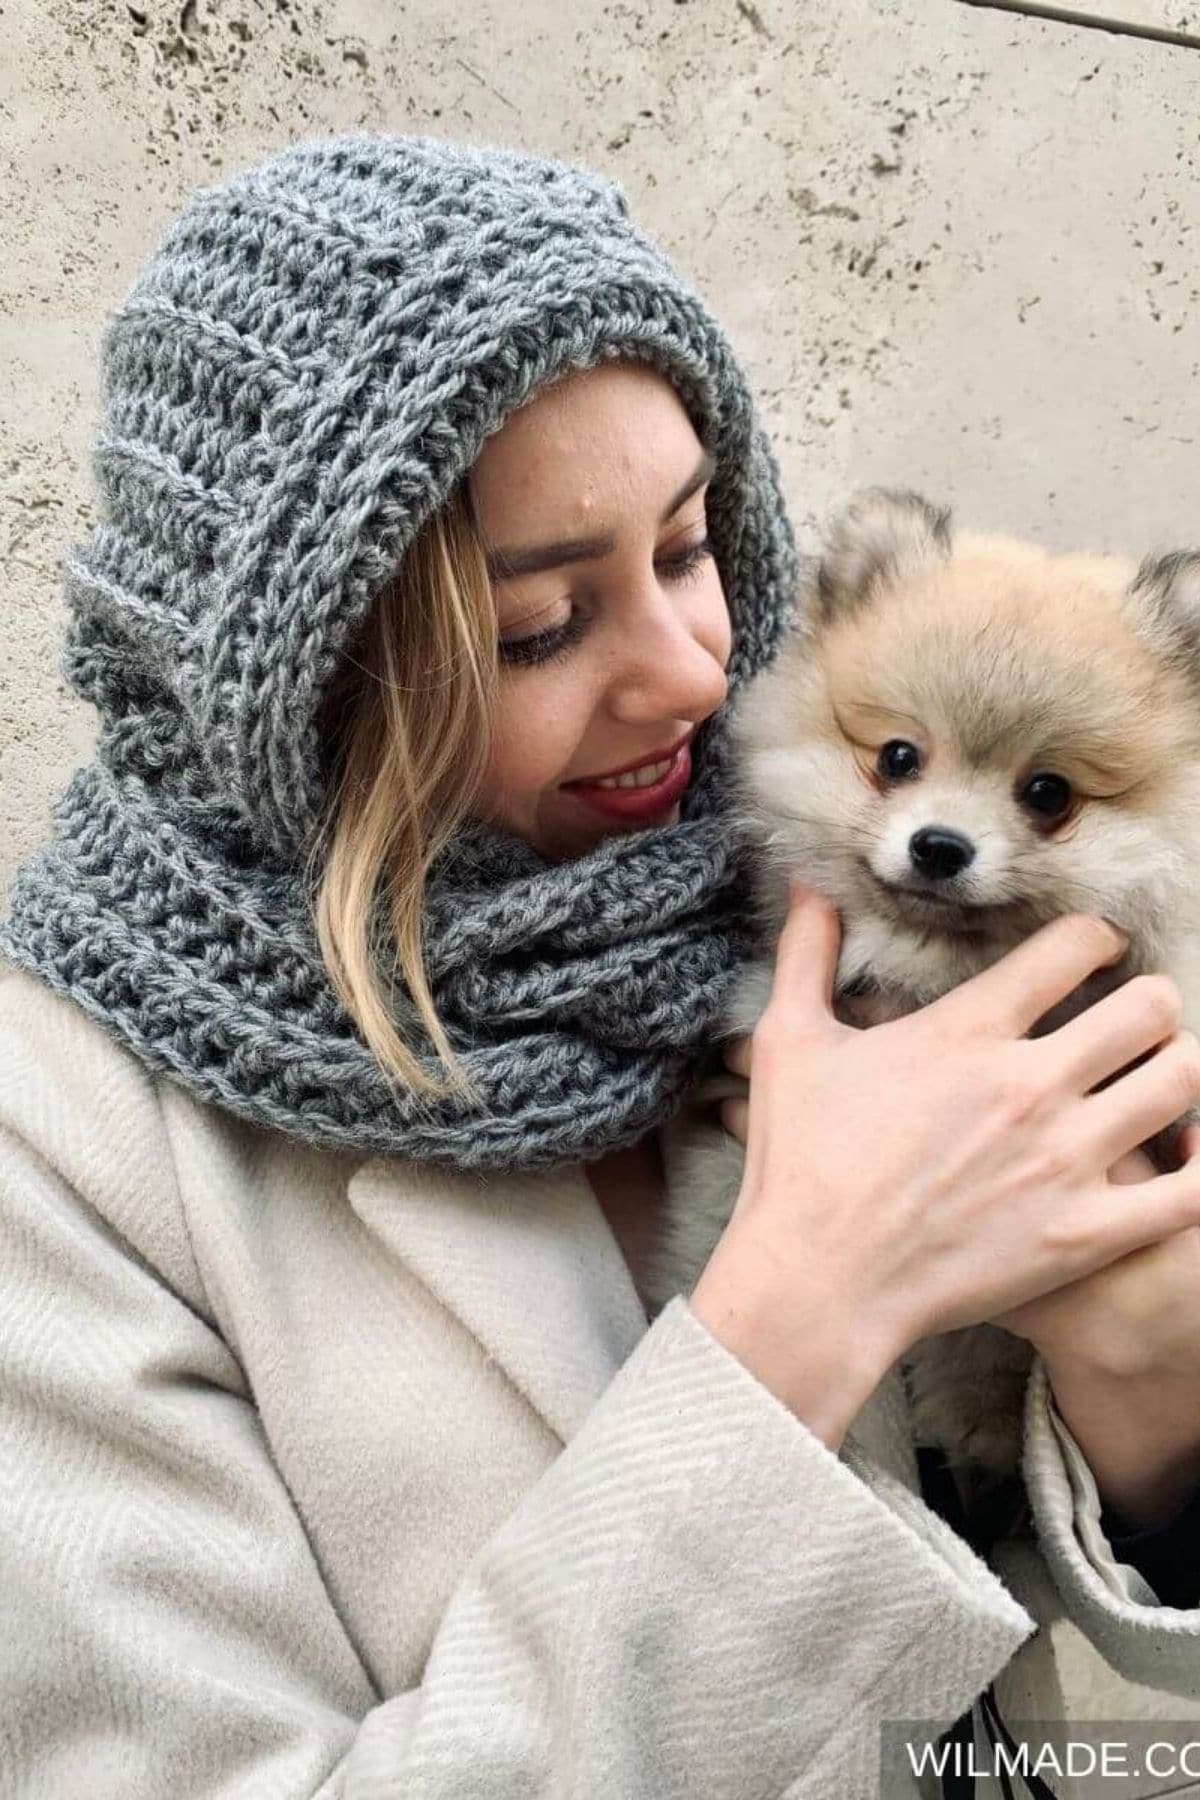 Blonde woman holding a Pomeranian wearing a light gray crochet hooded scarf over her head and neck.